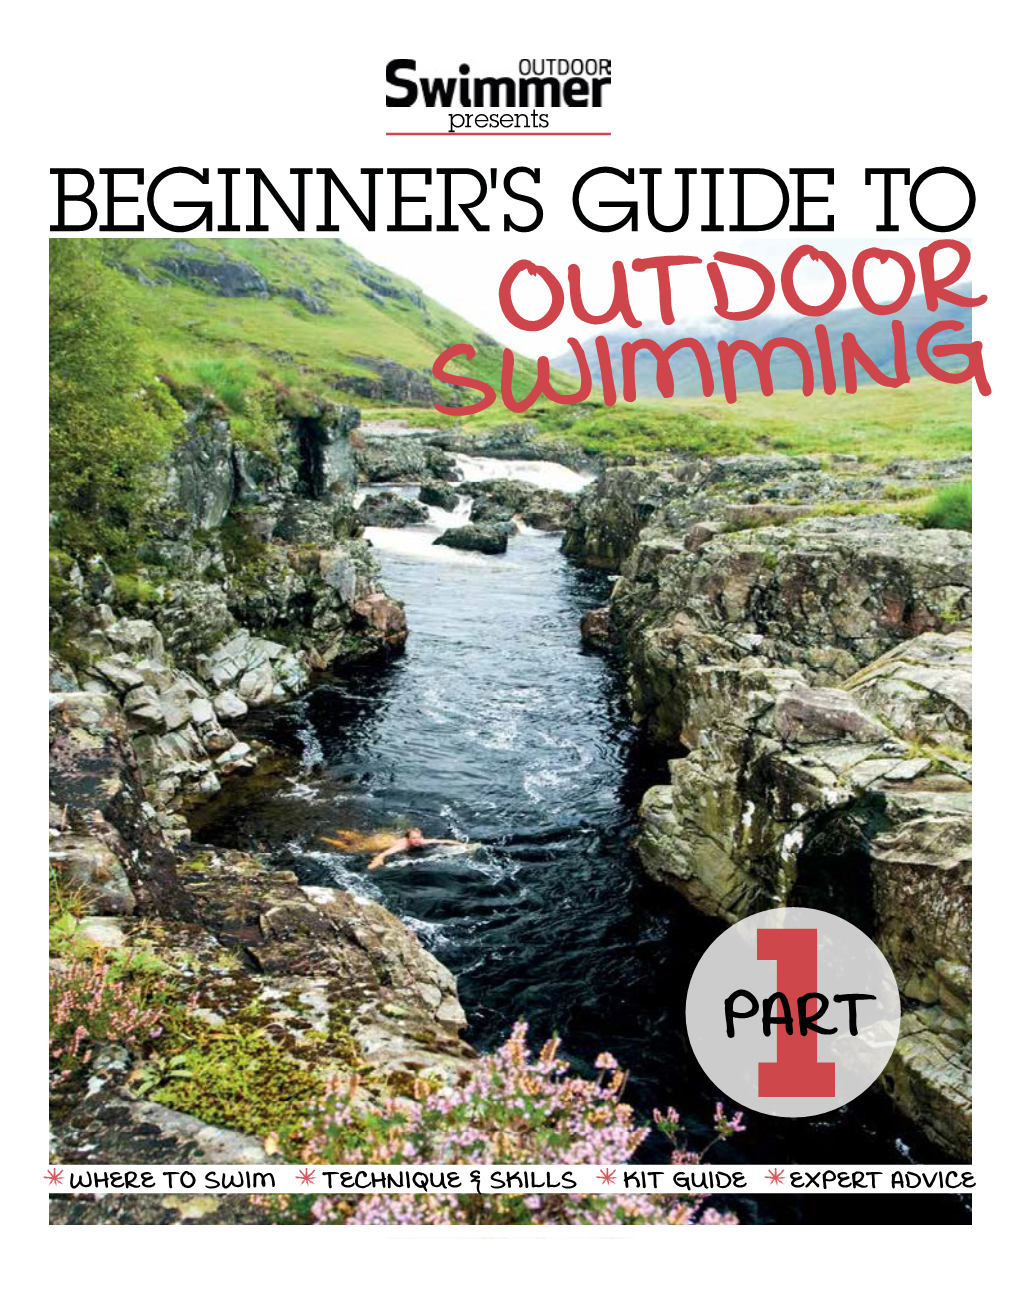 Beginner's Guide to Outdoor Swimming